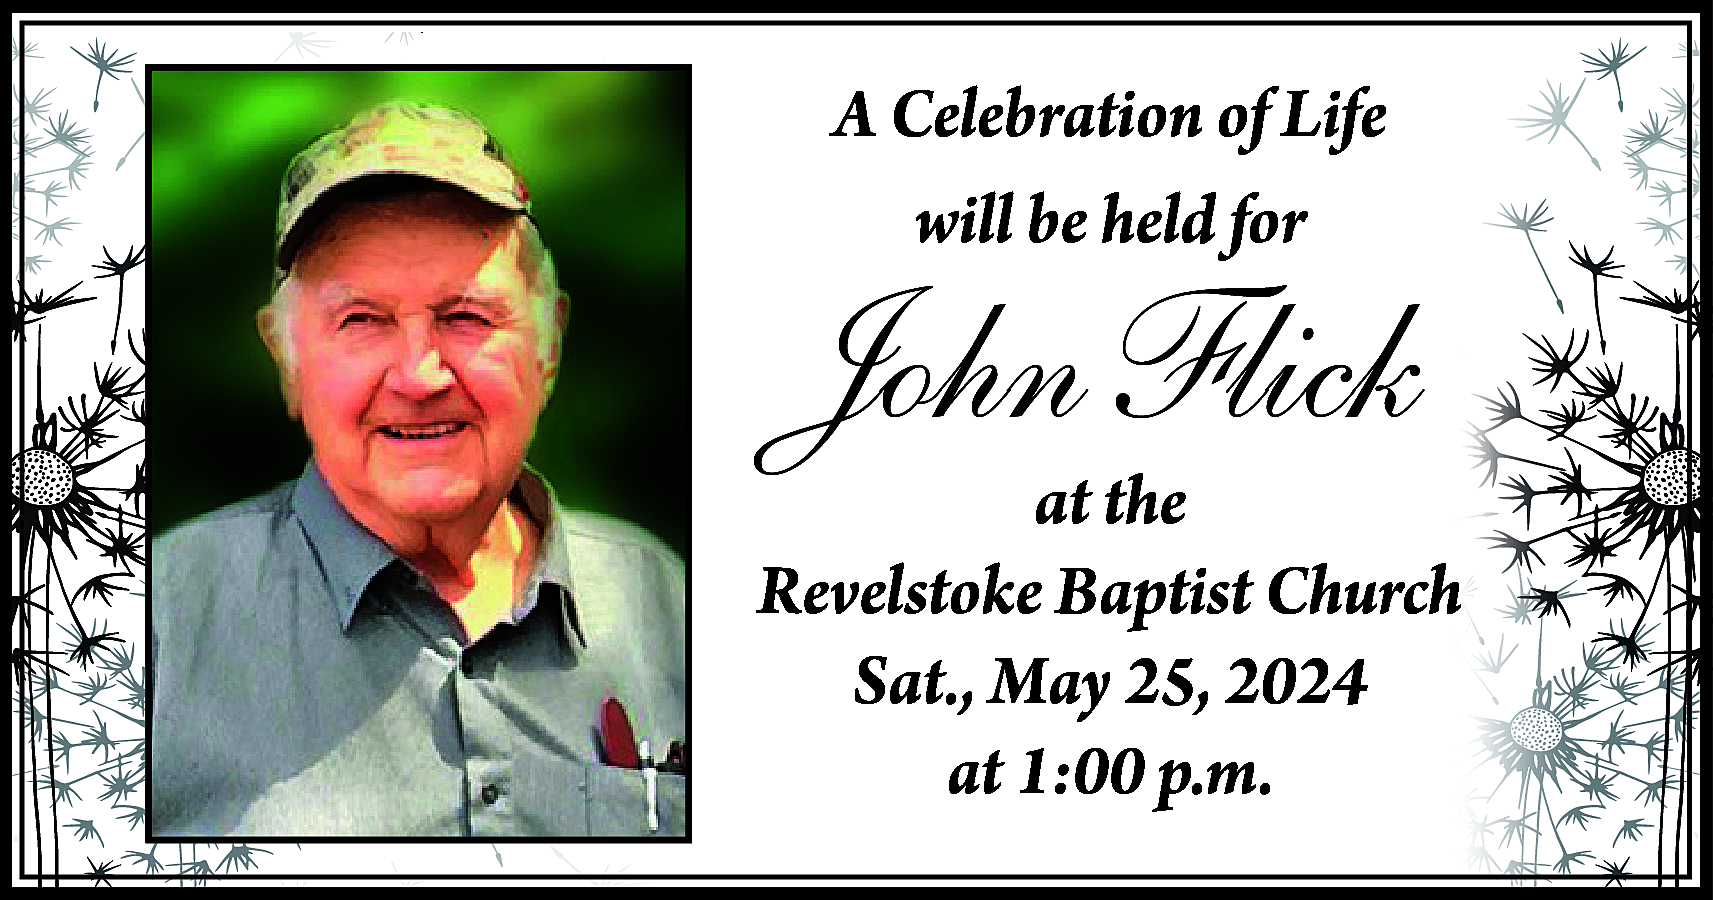 A Celebration of Life <br>will  A Celebration of Life  will be held for    John Flick    at the  Revelstoke Baptist Church  Sat., May 25, 2024  at 1:00 p.m.    